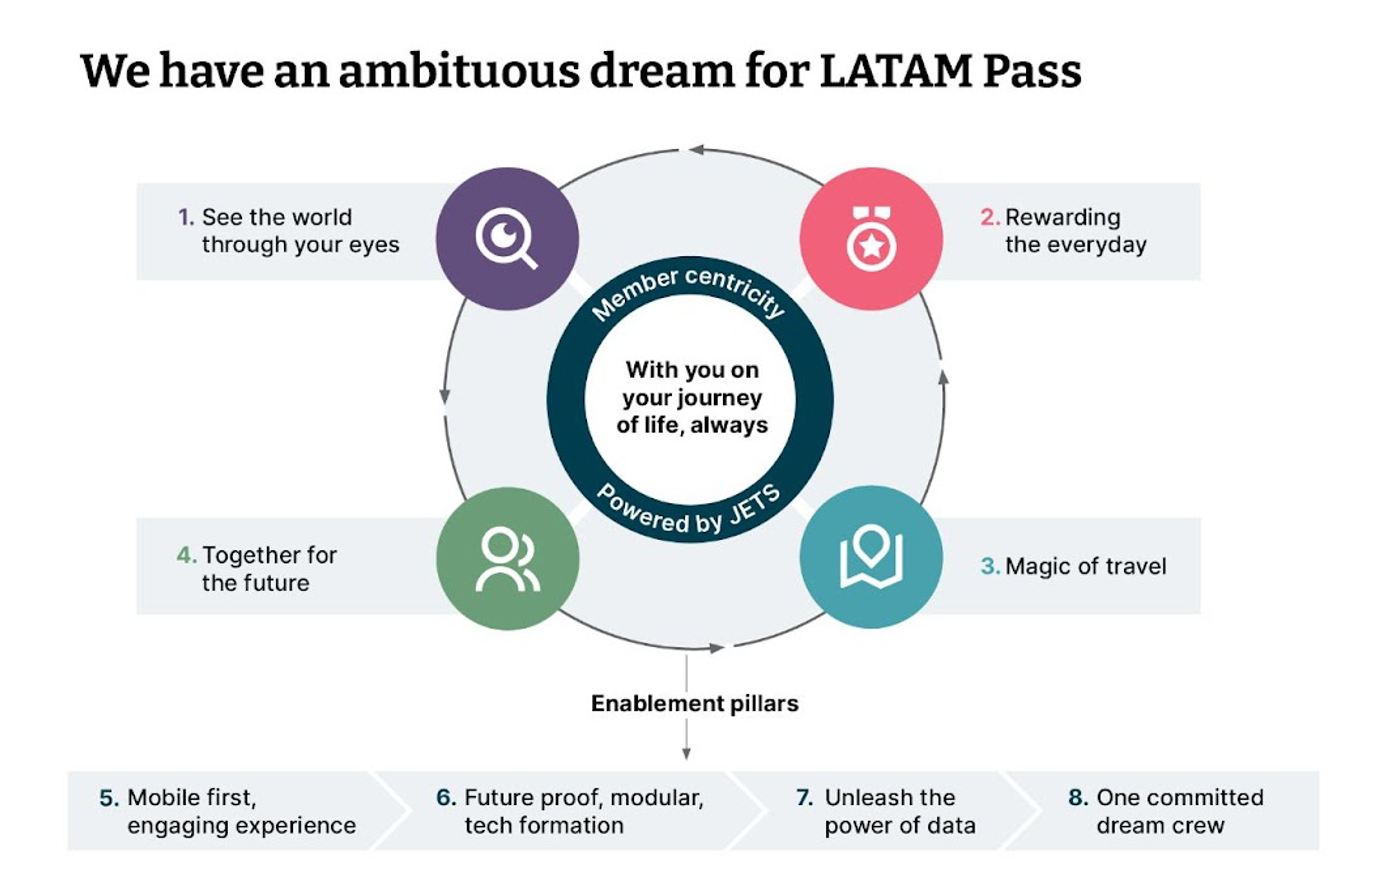 The ambituous dreams for LATAM Pass and the enablement pillars